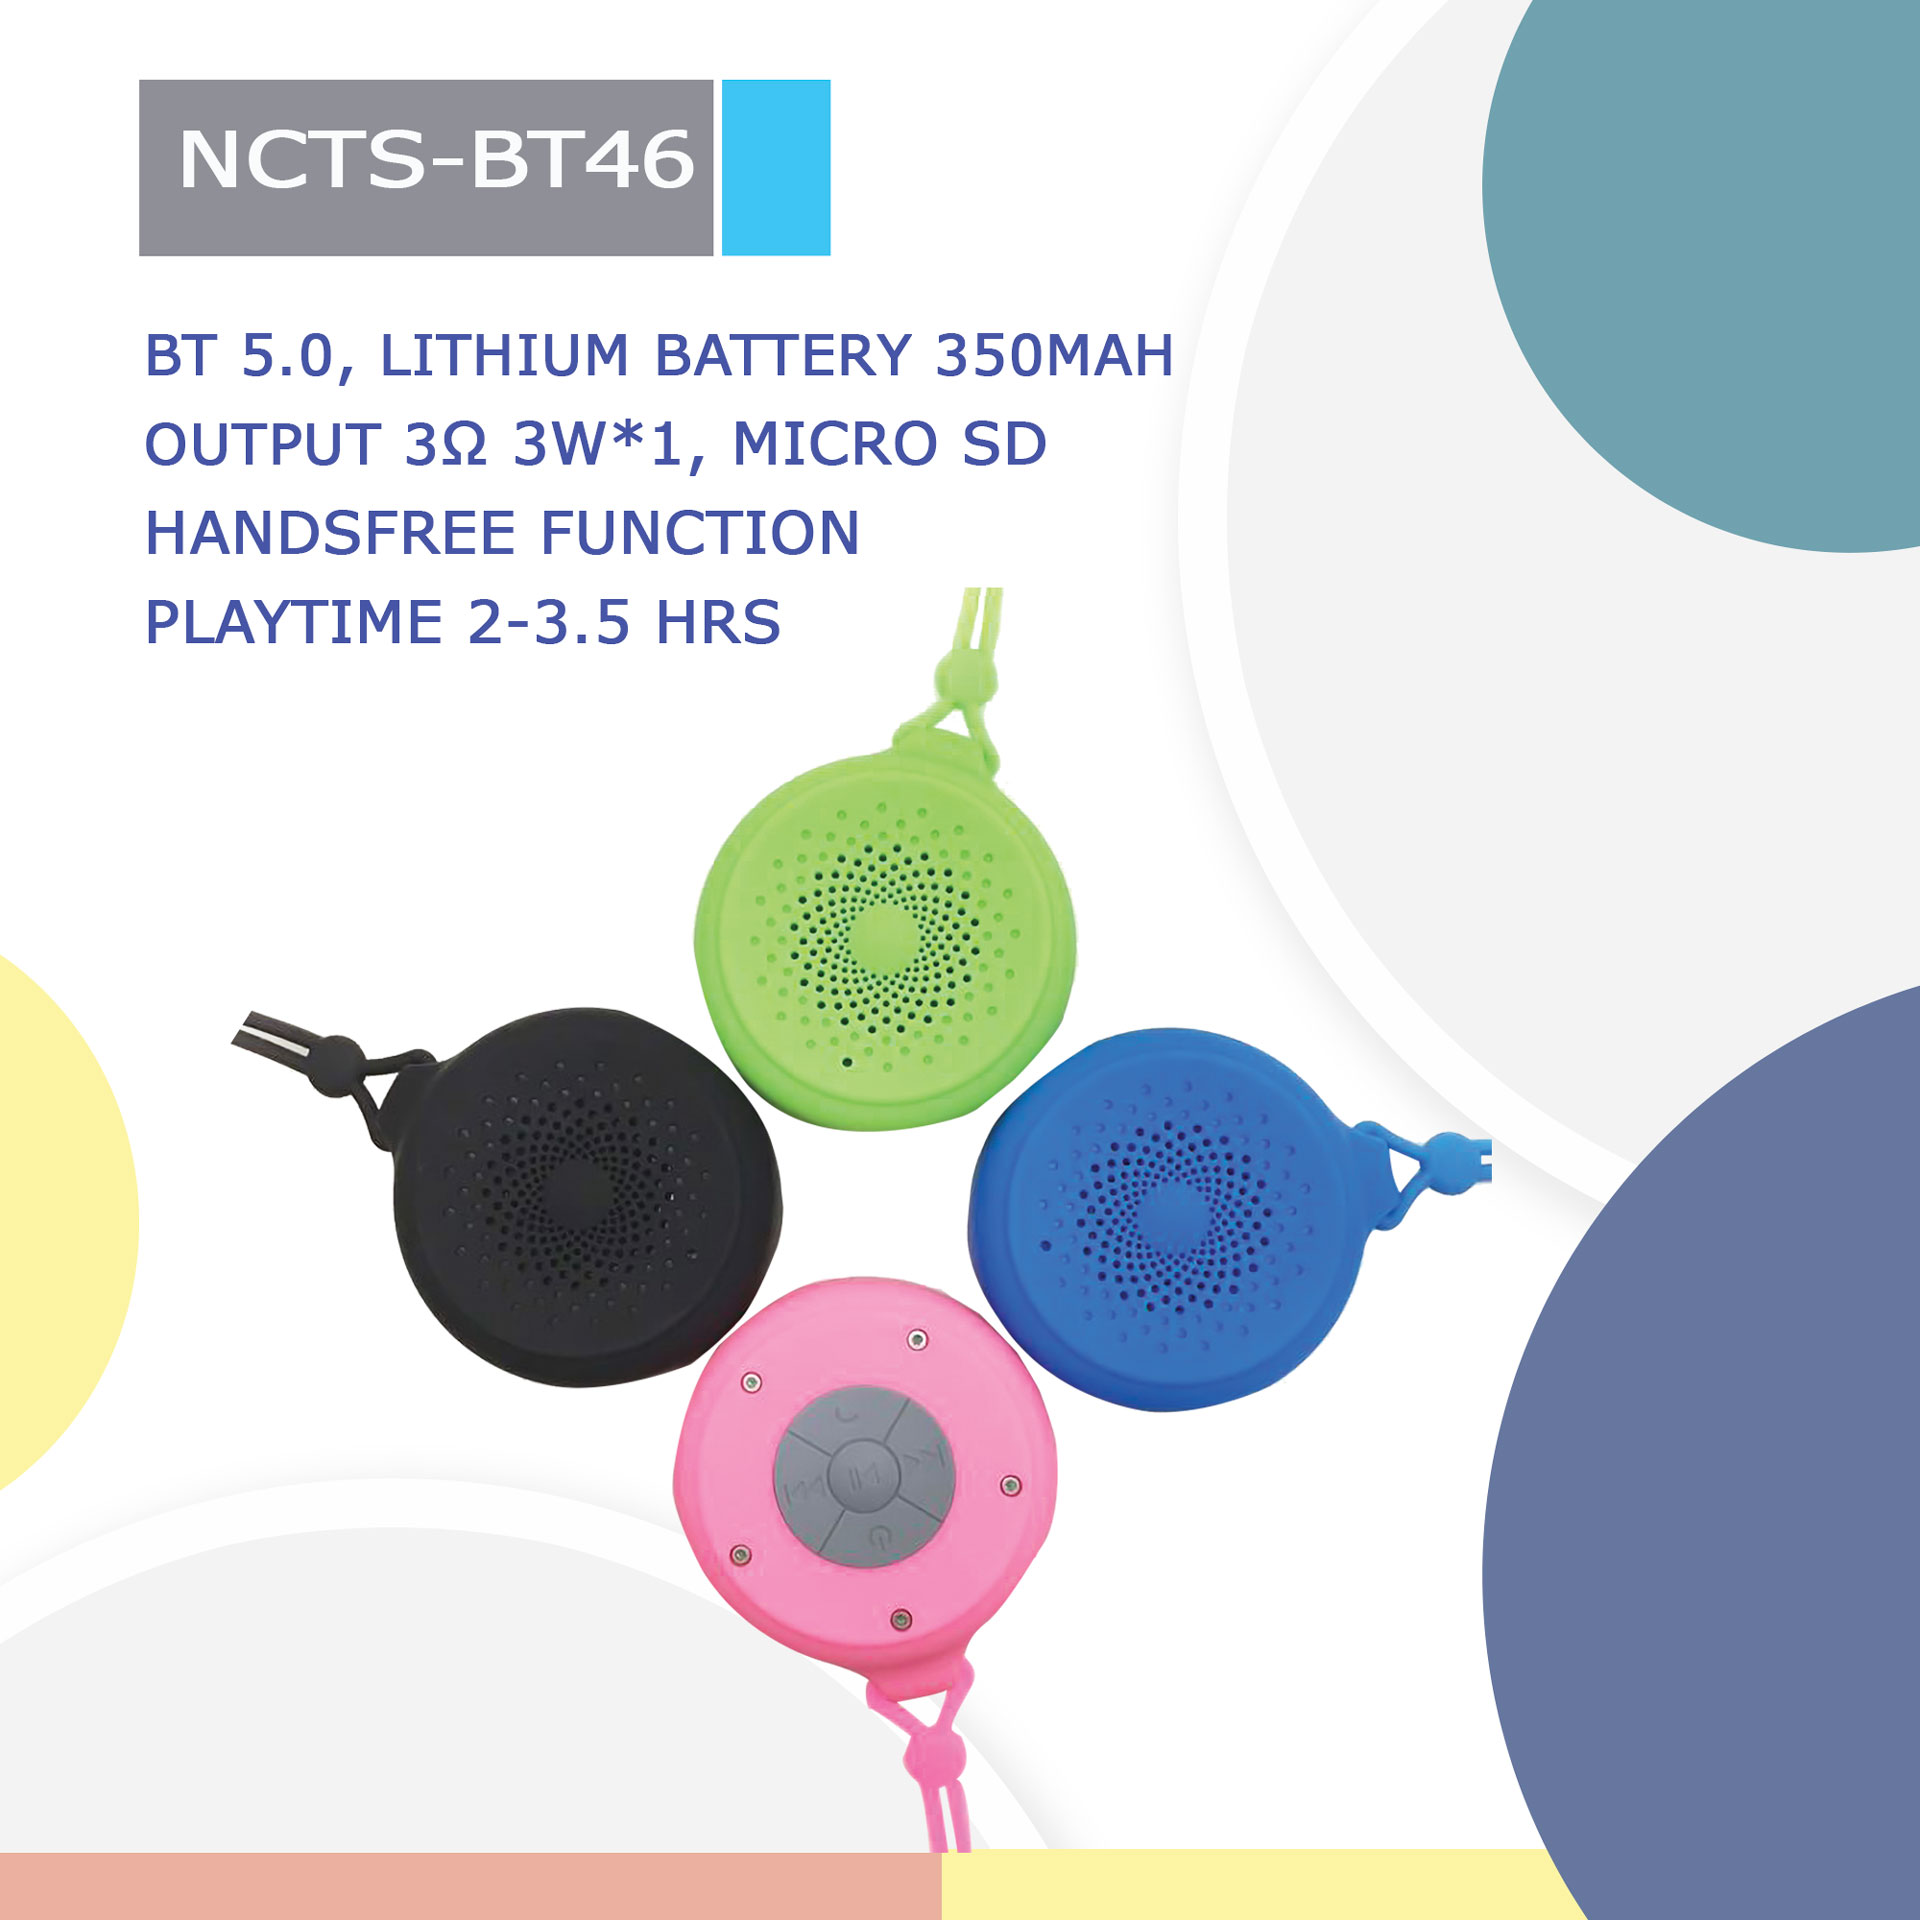 NCTS-BT46